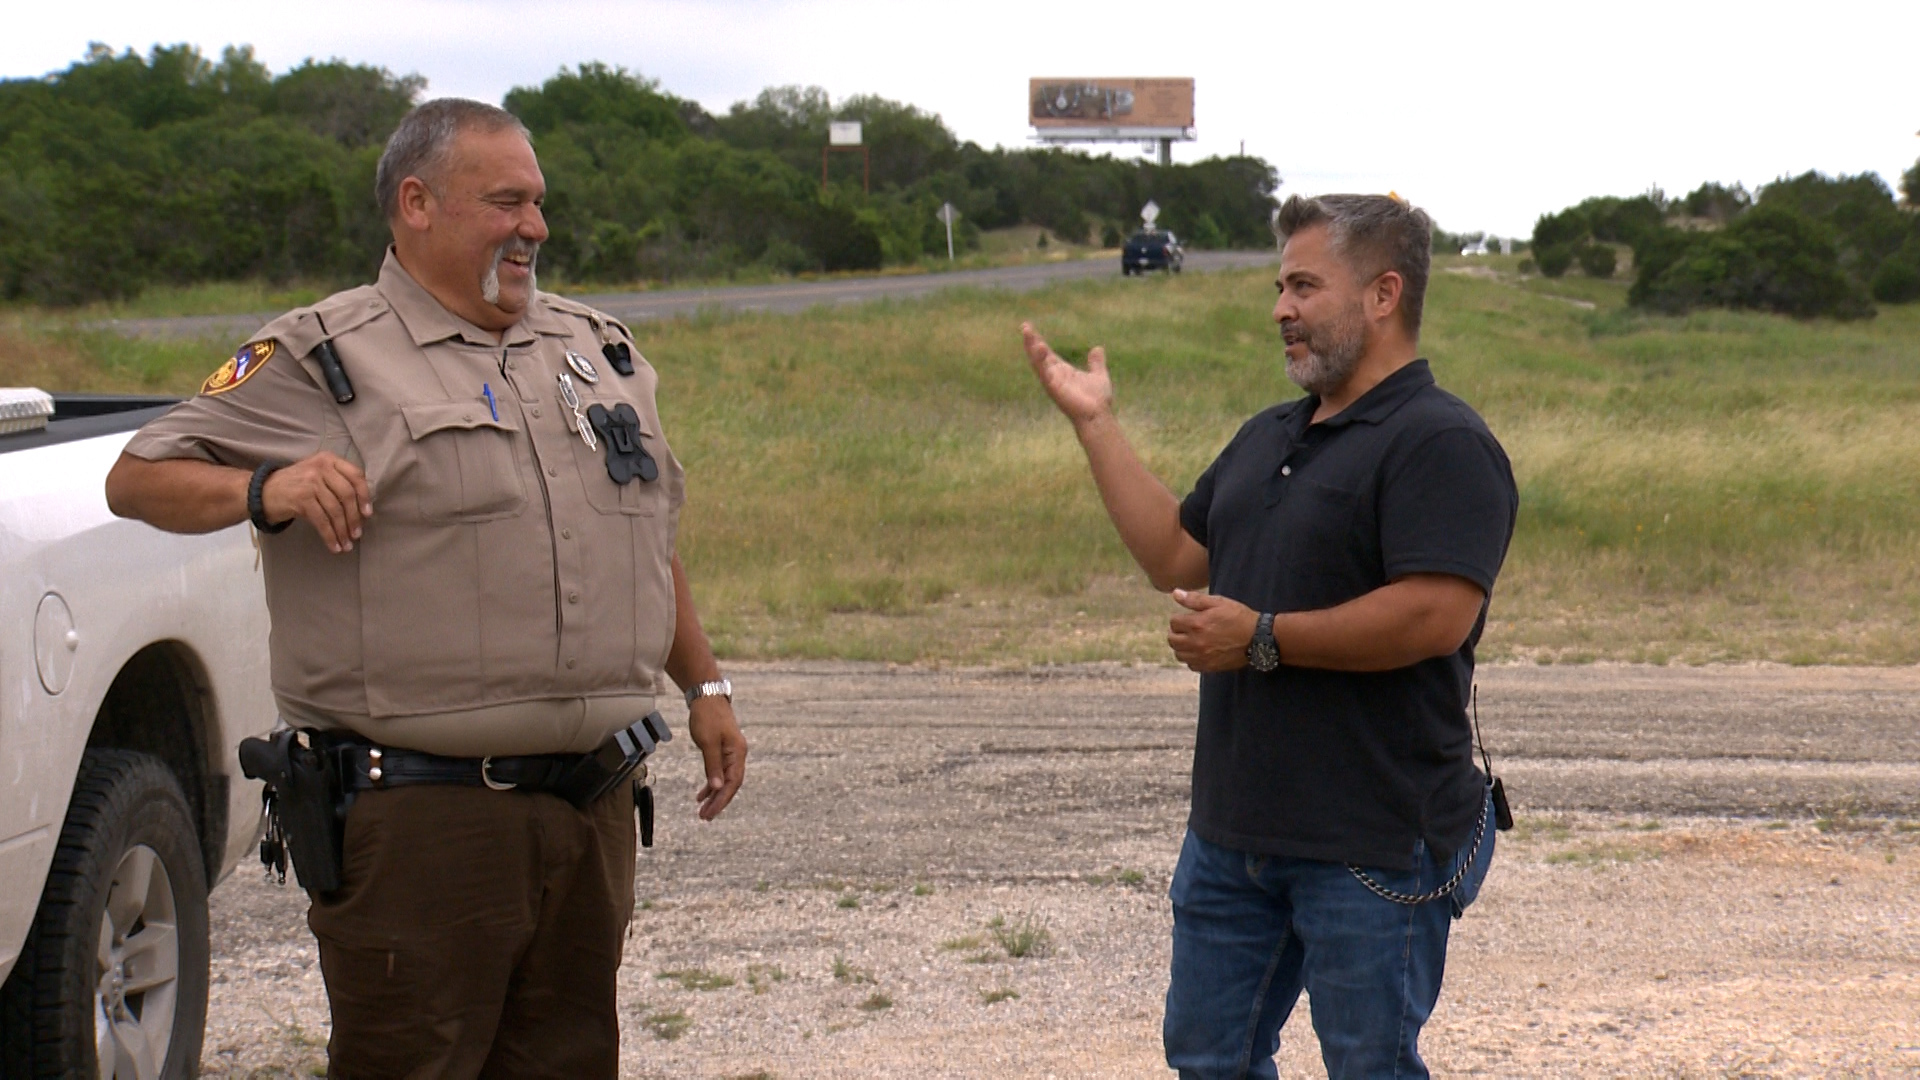 Paul Canales was five miles away with half an hour to spare before graduation. Then Deputy Sheriff Richard Mhartain drove by the right place at the right time.